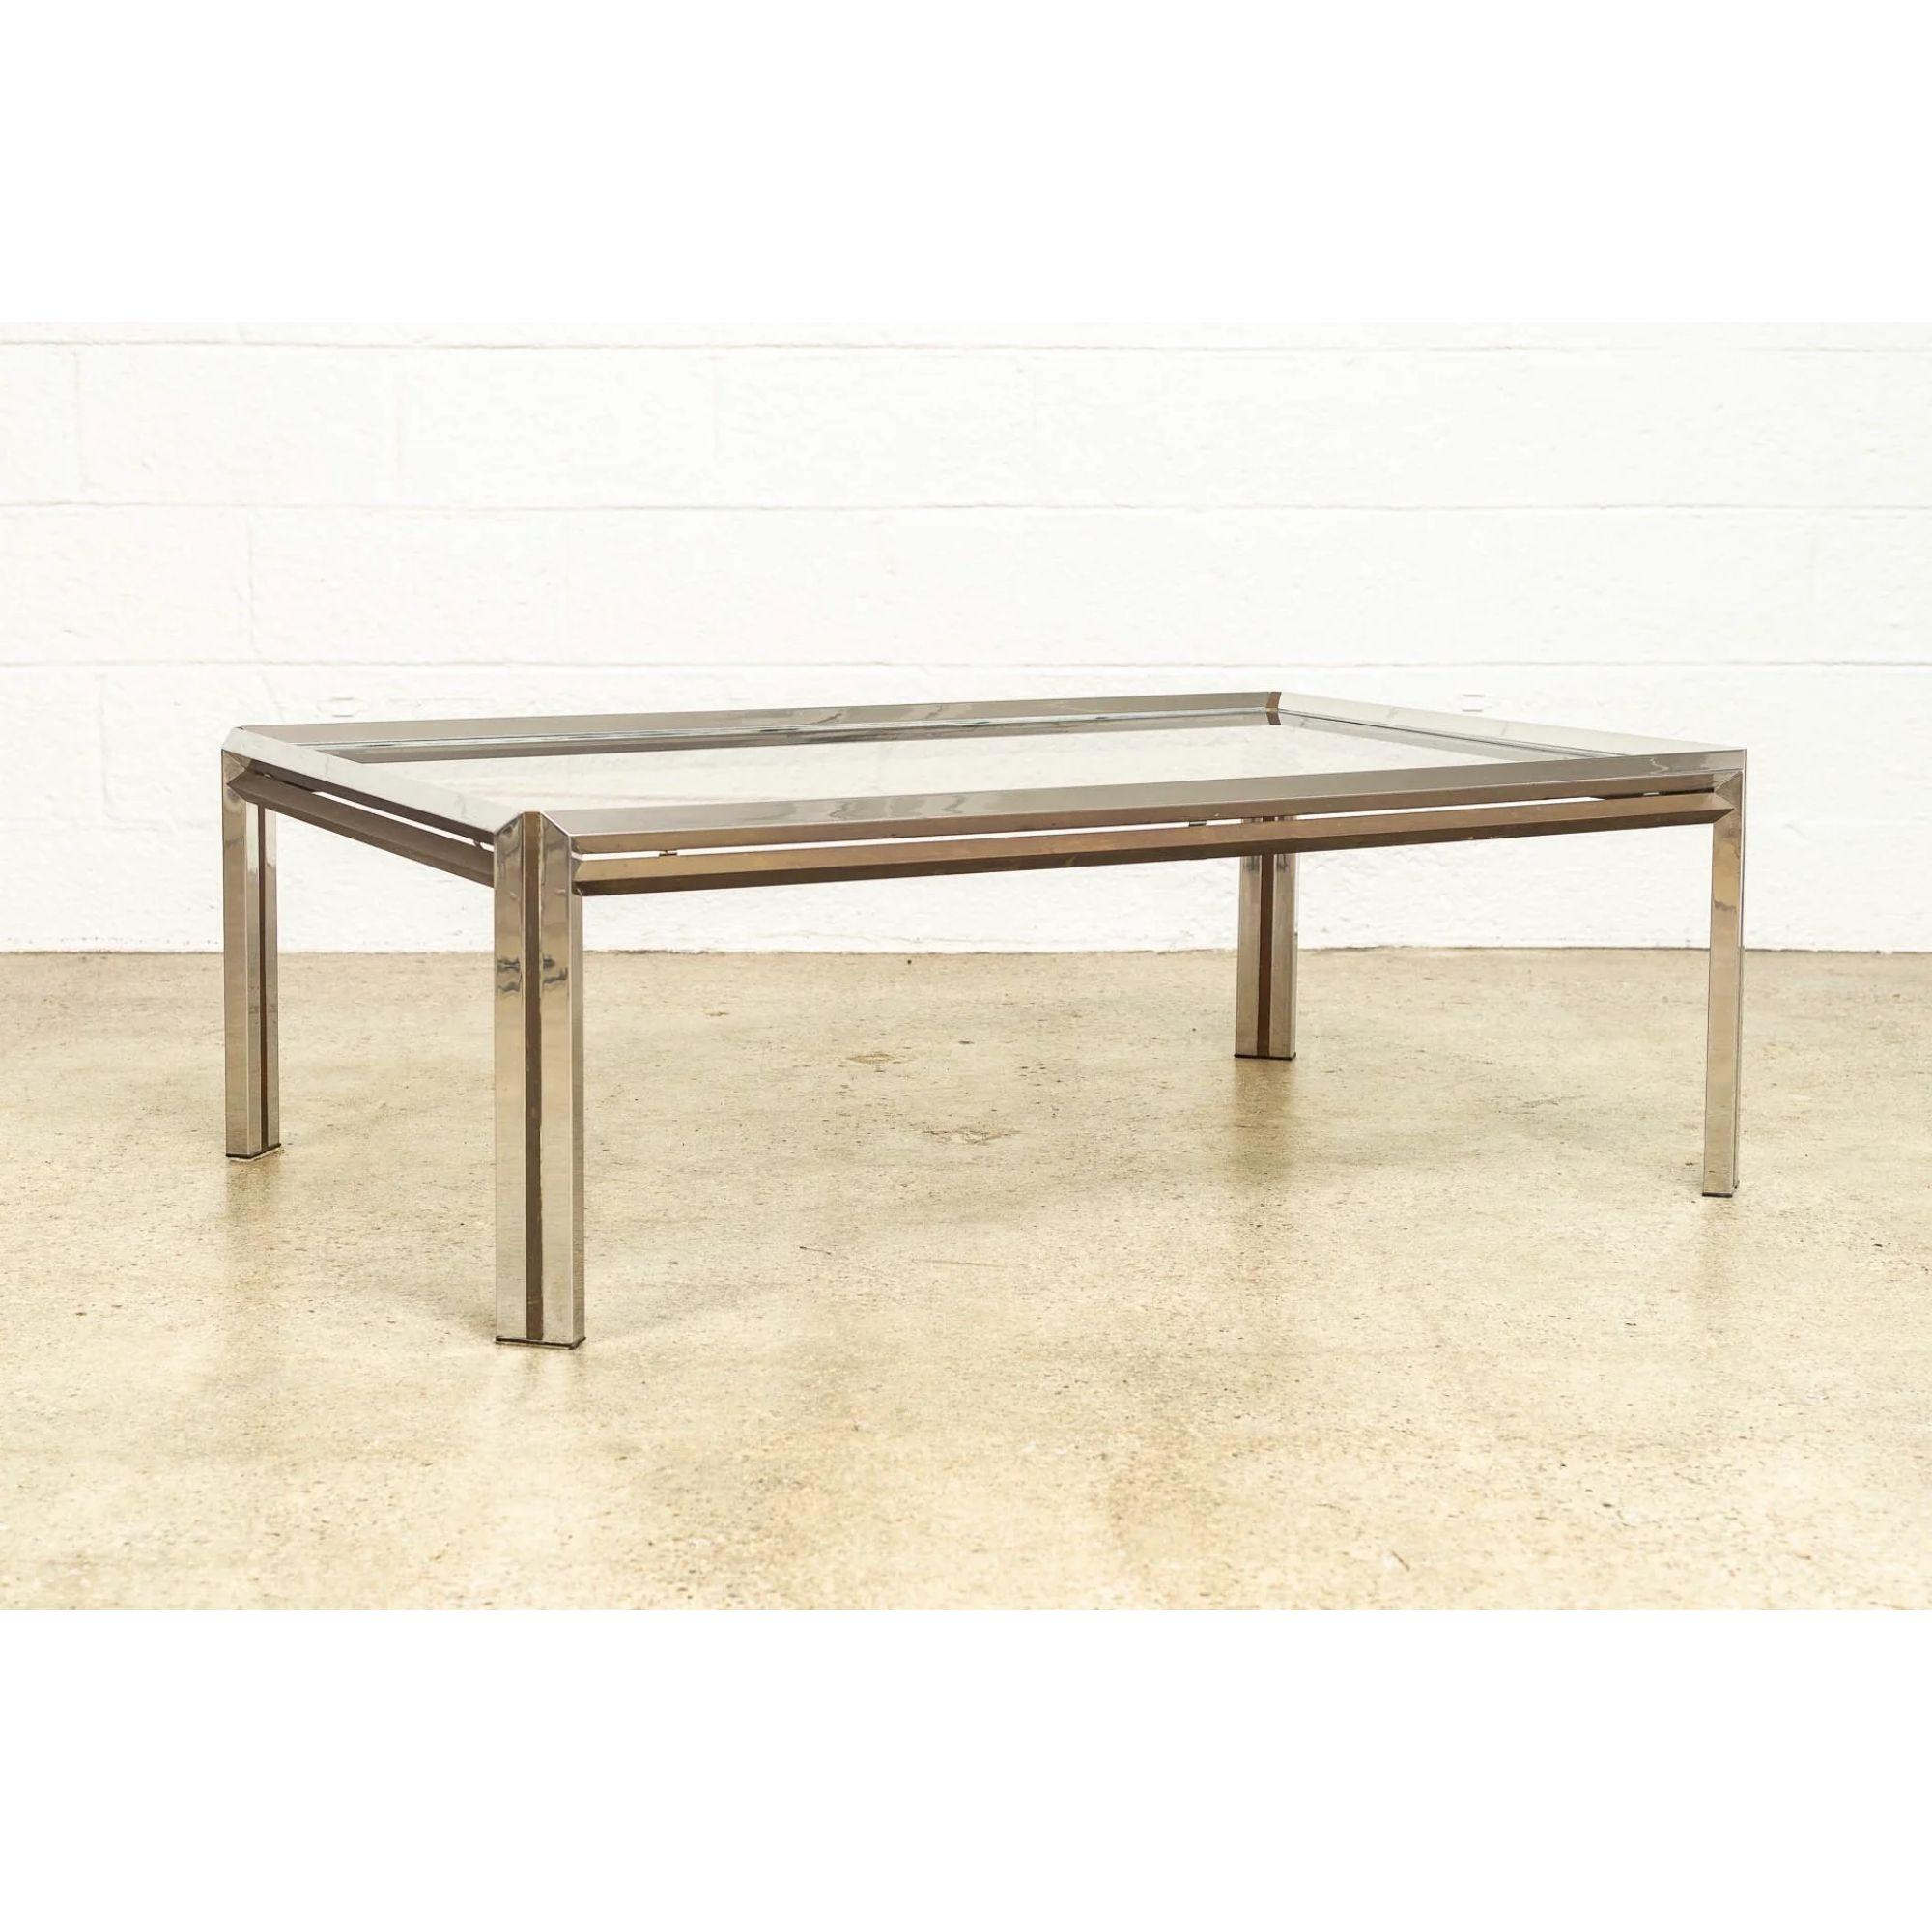 20th Century Mid-Century Modern Coffee Table in Chrome, Brass and Glass, 1970s For Sale